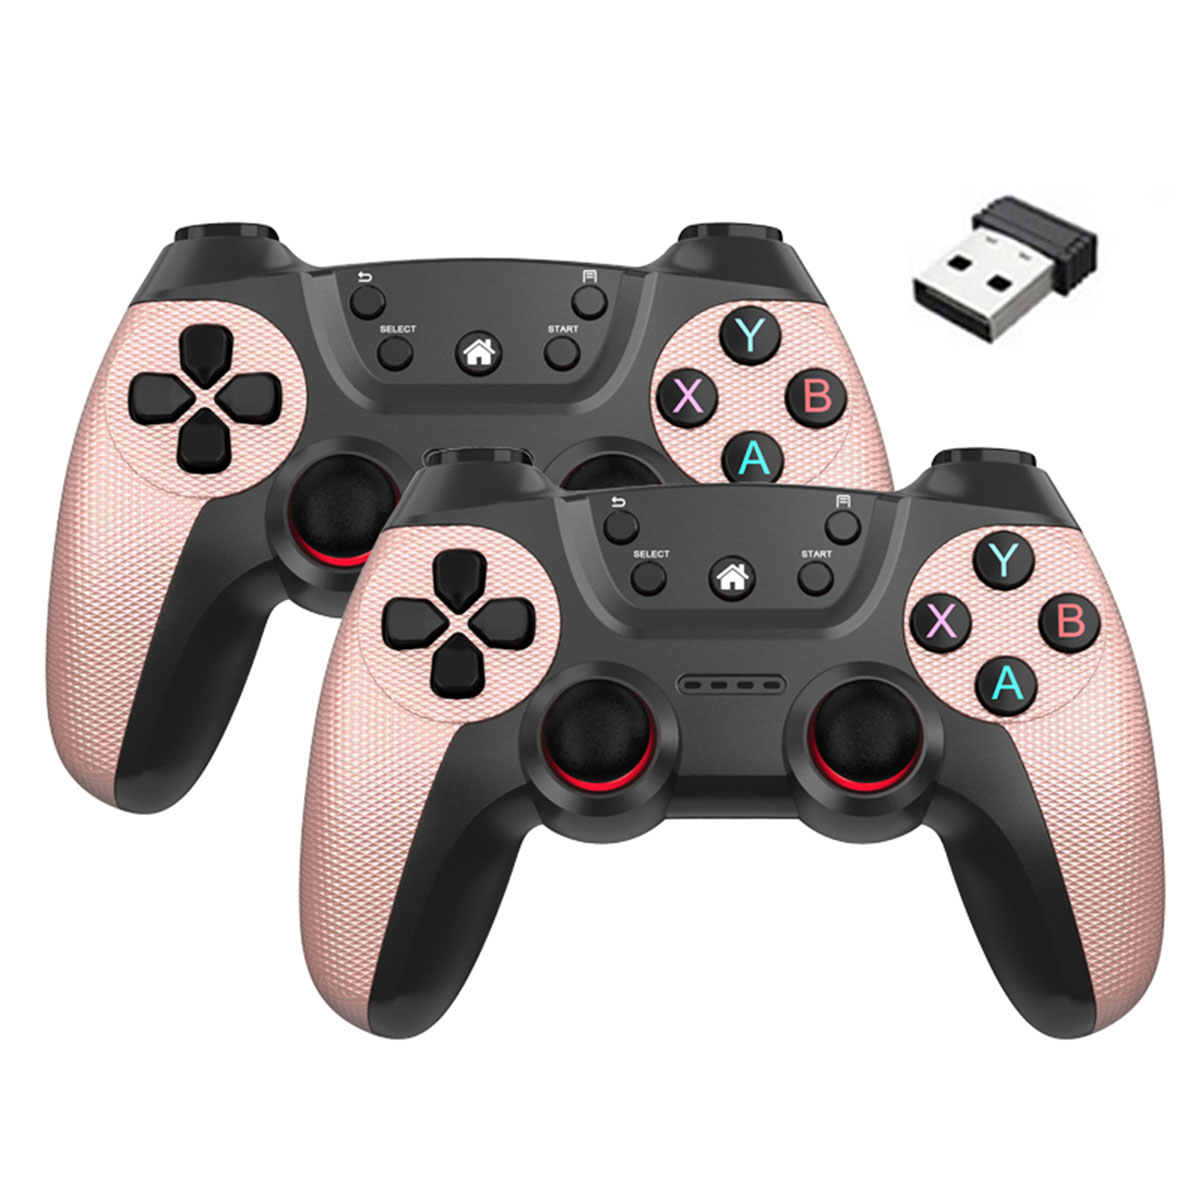 Gamepad,Android-Controller,Gamepad,2.4G,für Rosenrosa Wireless RESPIEL PC,Android Controller Doppeltes